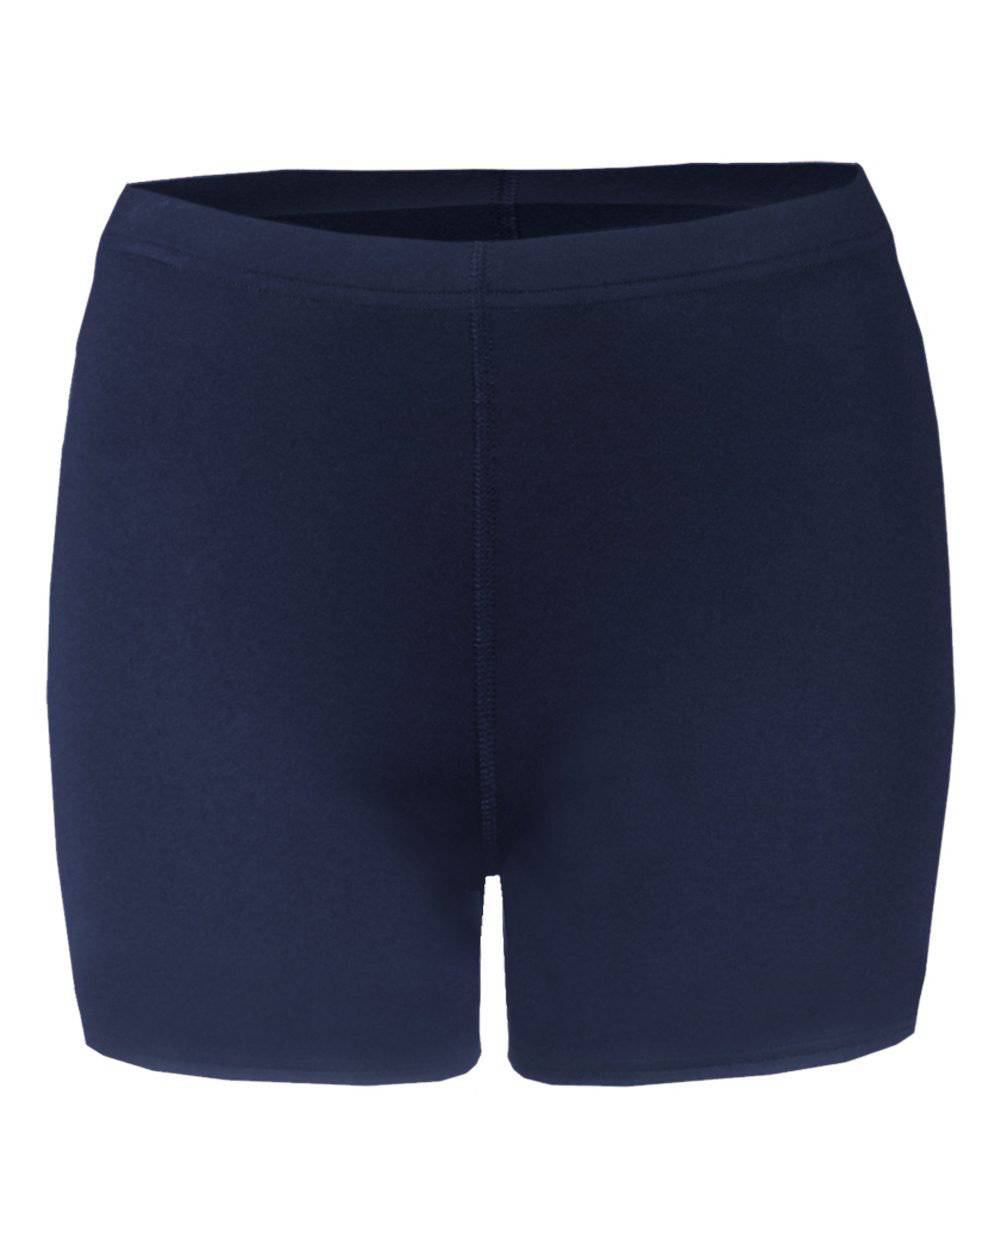 Badger Sport 4614 B-Fit Compression Ladies Short 4" - Navy - HIT a Double - 1